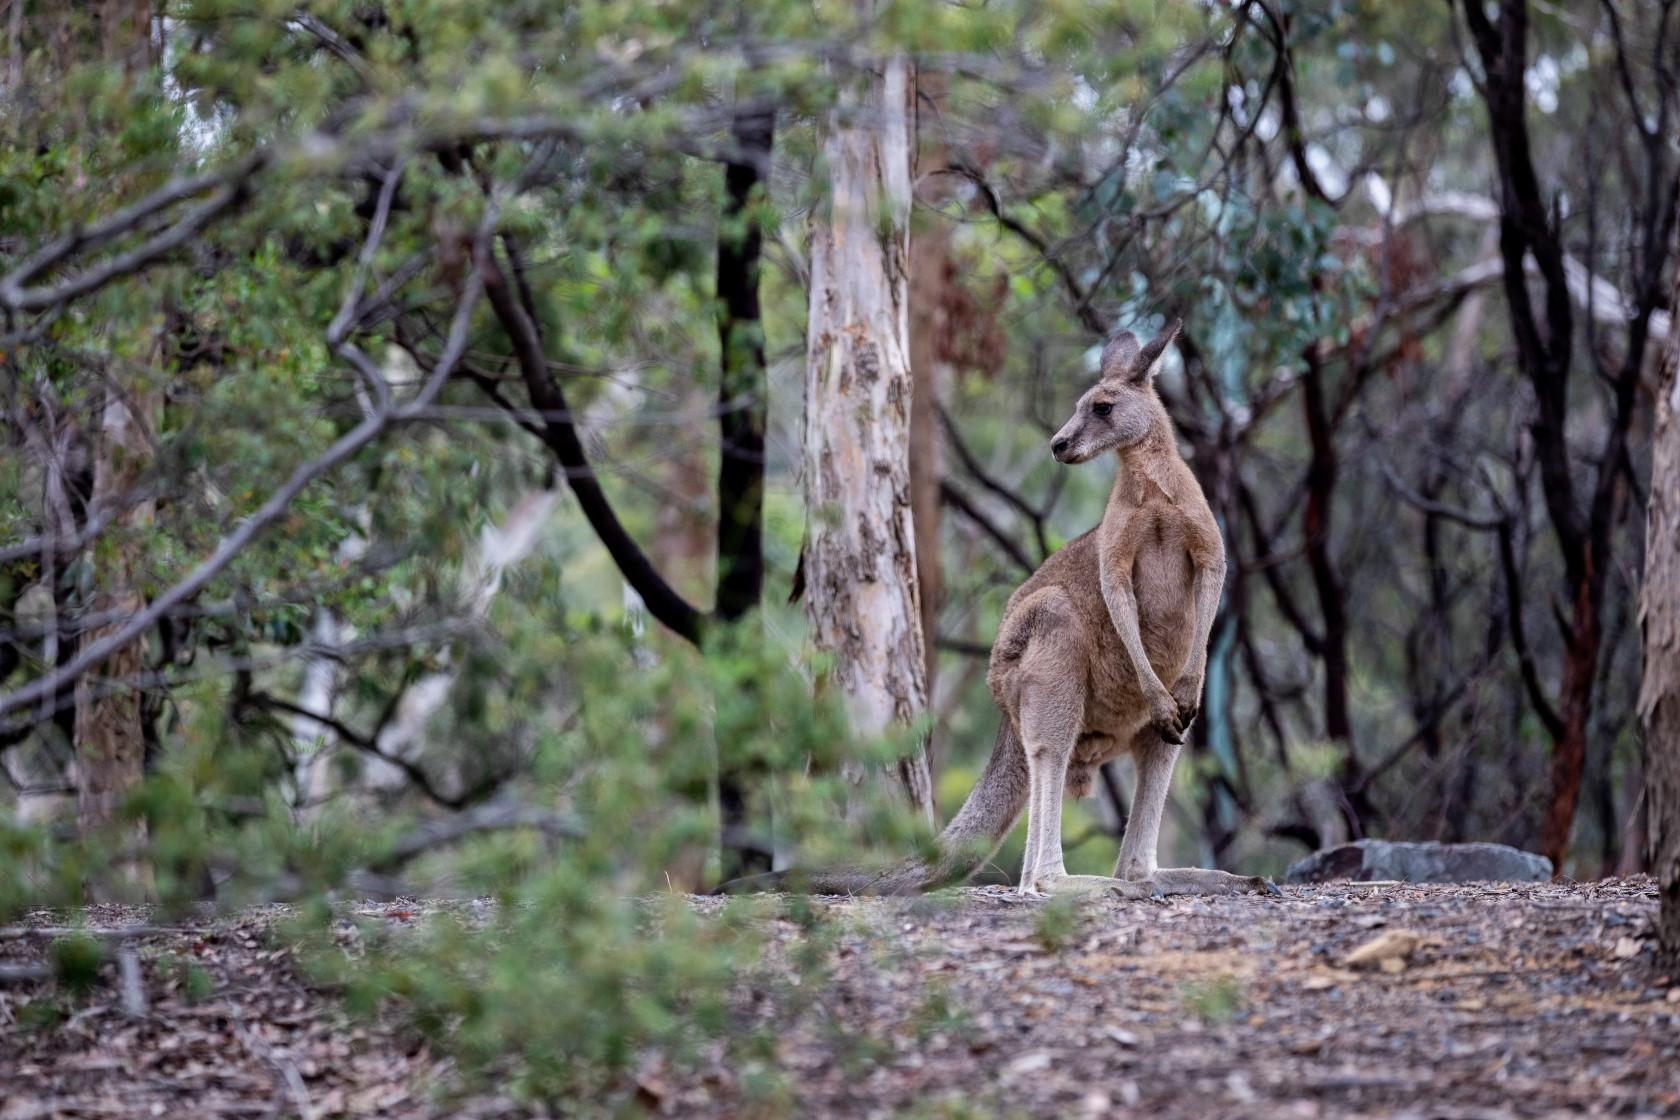 Kangaroo standing on a rock with leaves in the foreground